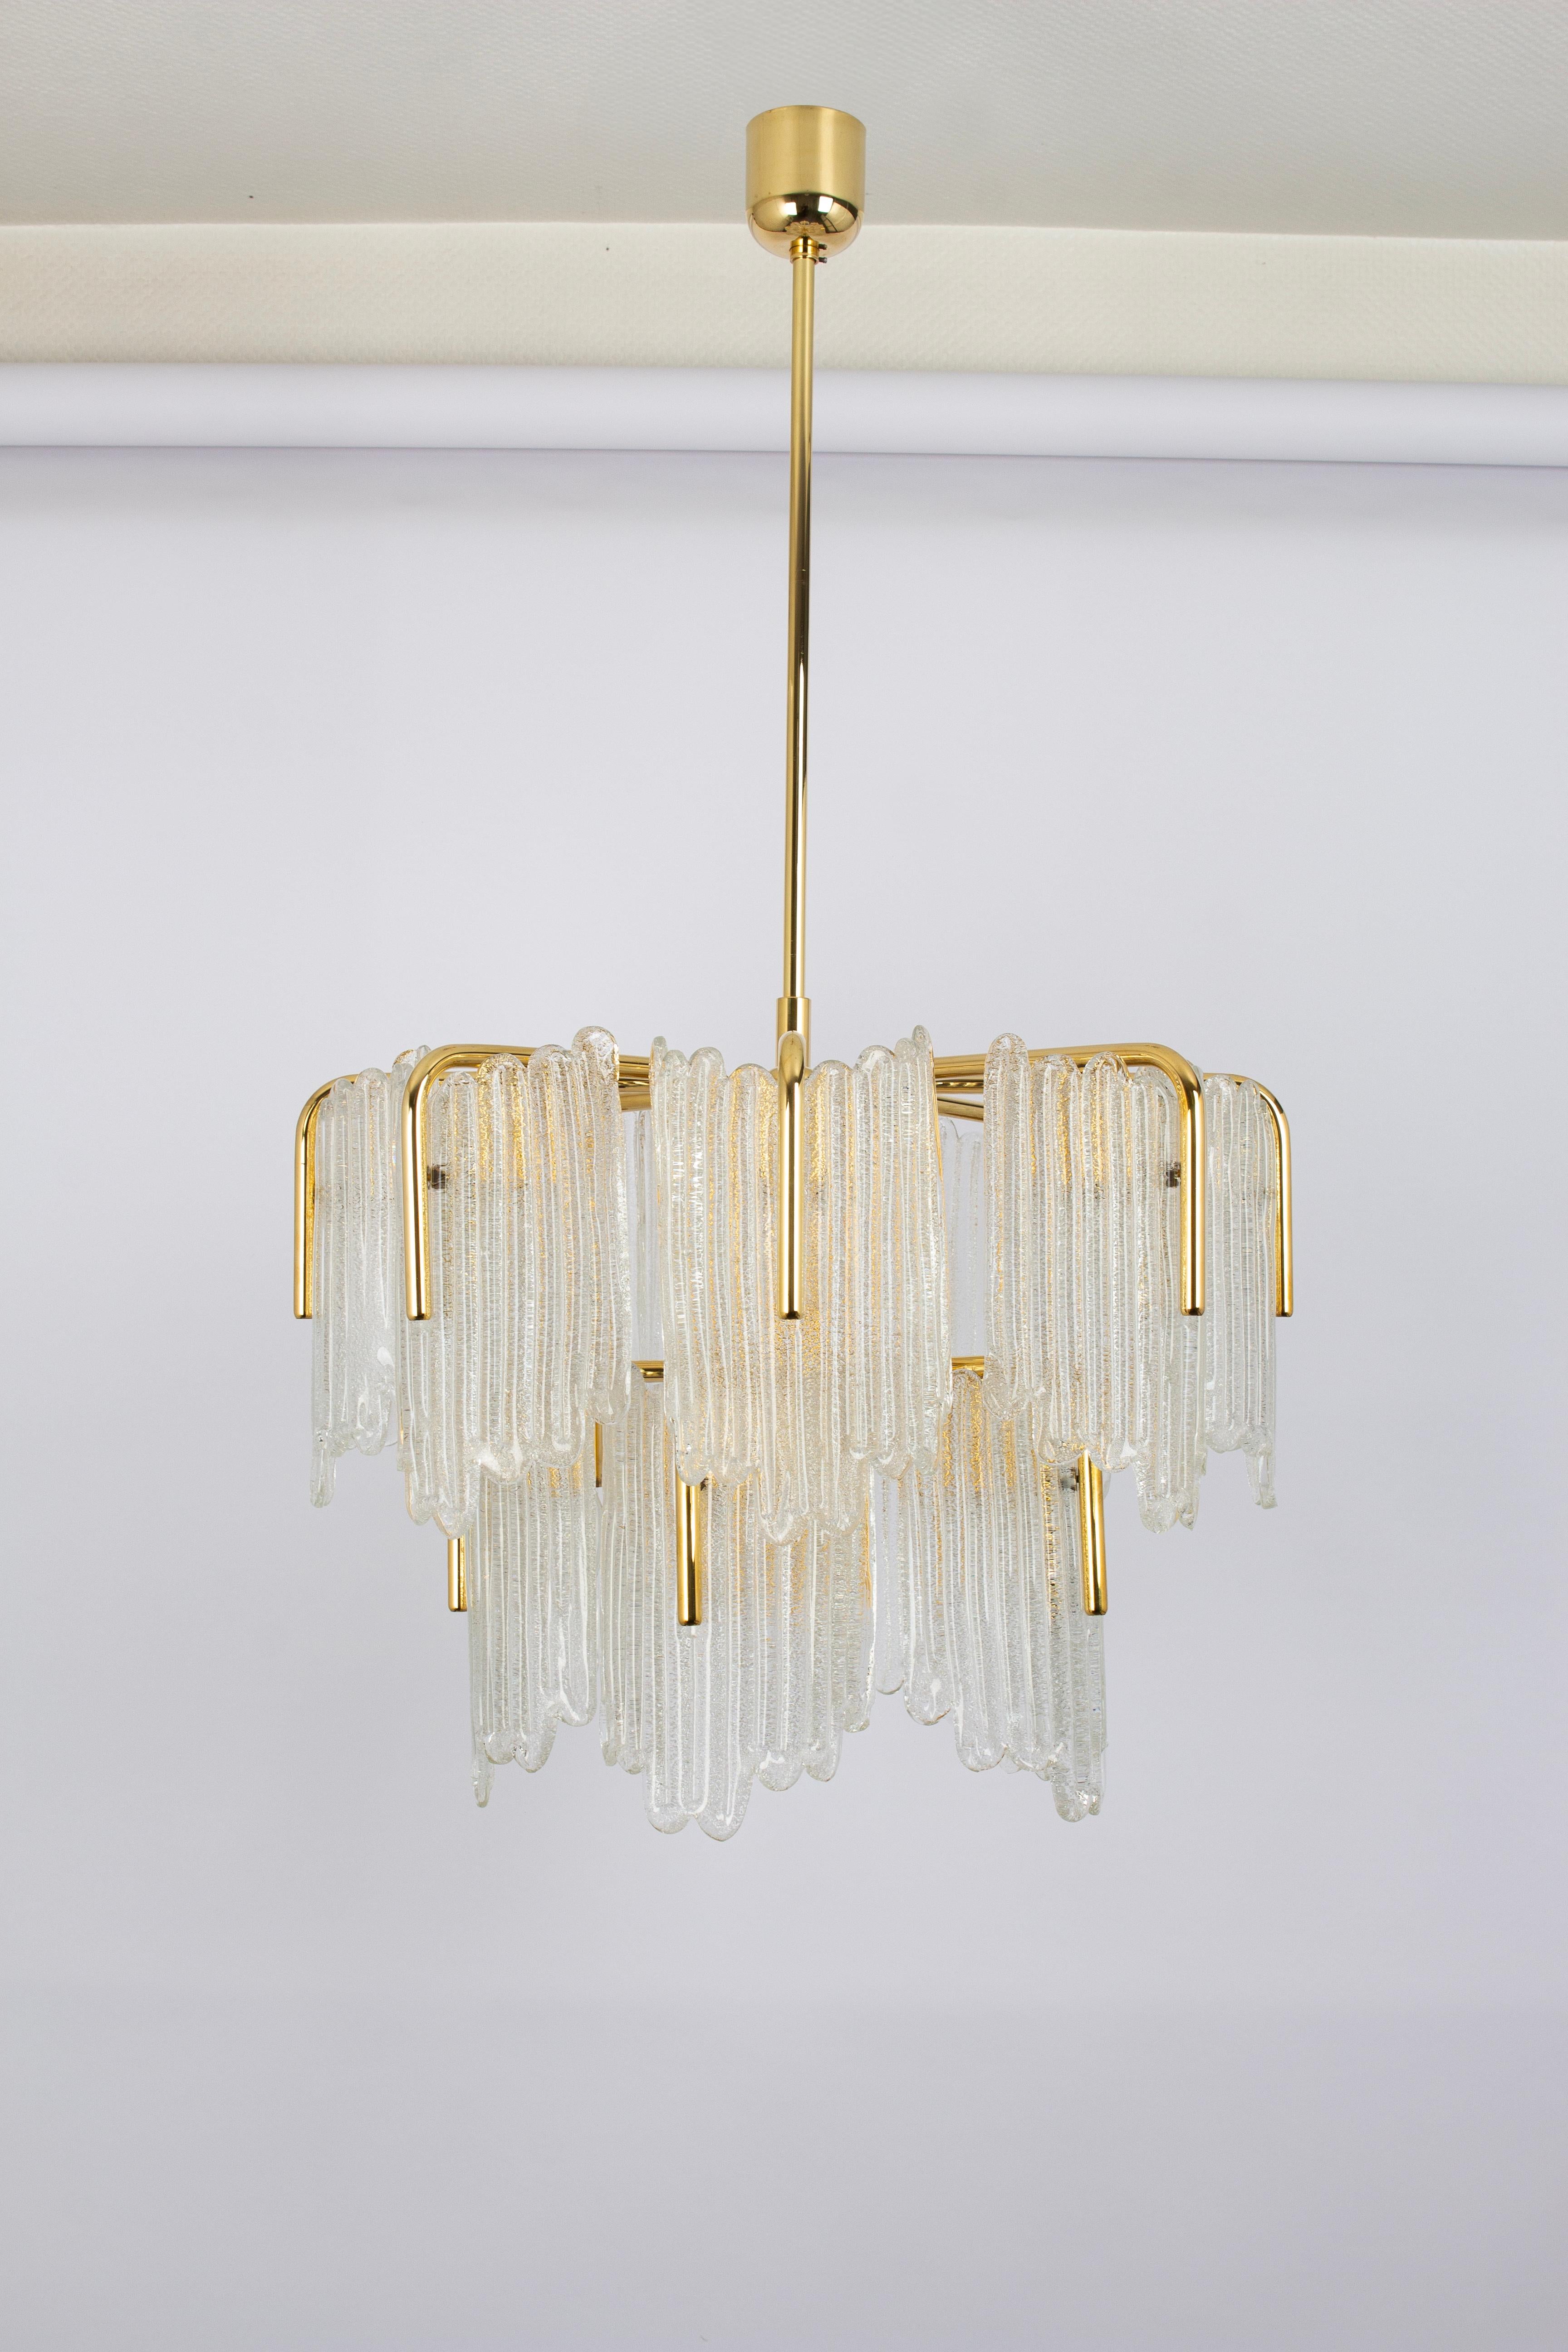 Very glamorous chandelier designed by Carl Fagerlund for JSB, Germany manufactured in midcentury, circa 1960-1969. The light features a polished brass frame with eight stunning Murano glass leaves which have a matte frosted relief on the inside and